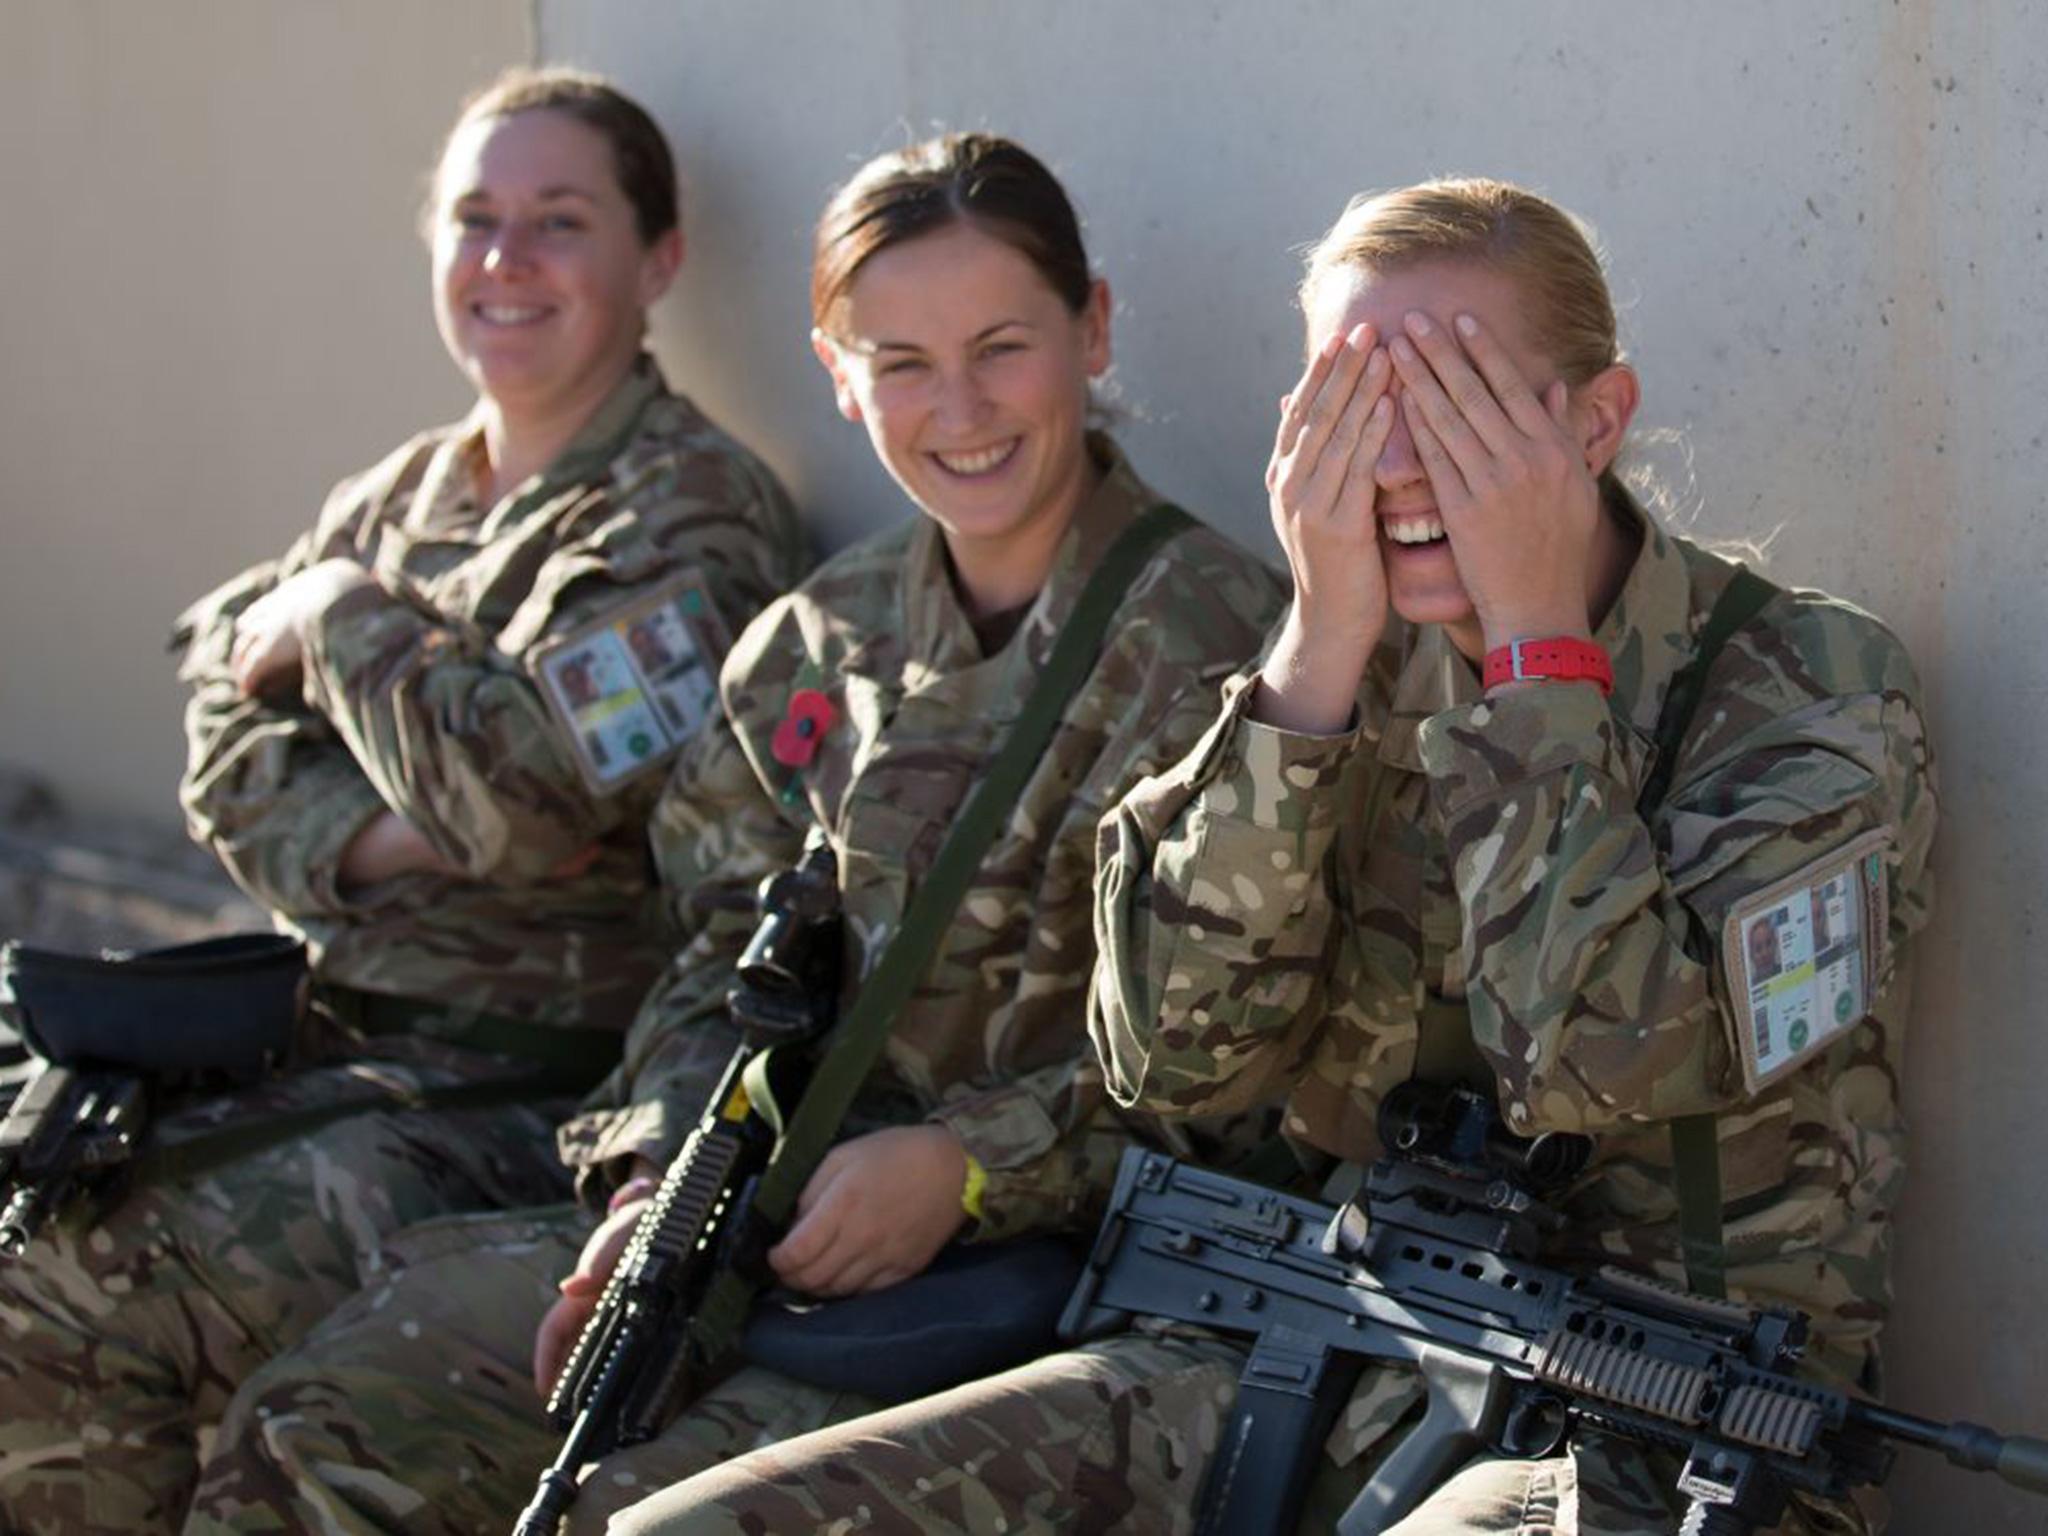 Female soldiers should no longer be banned from serving in combat